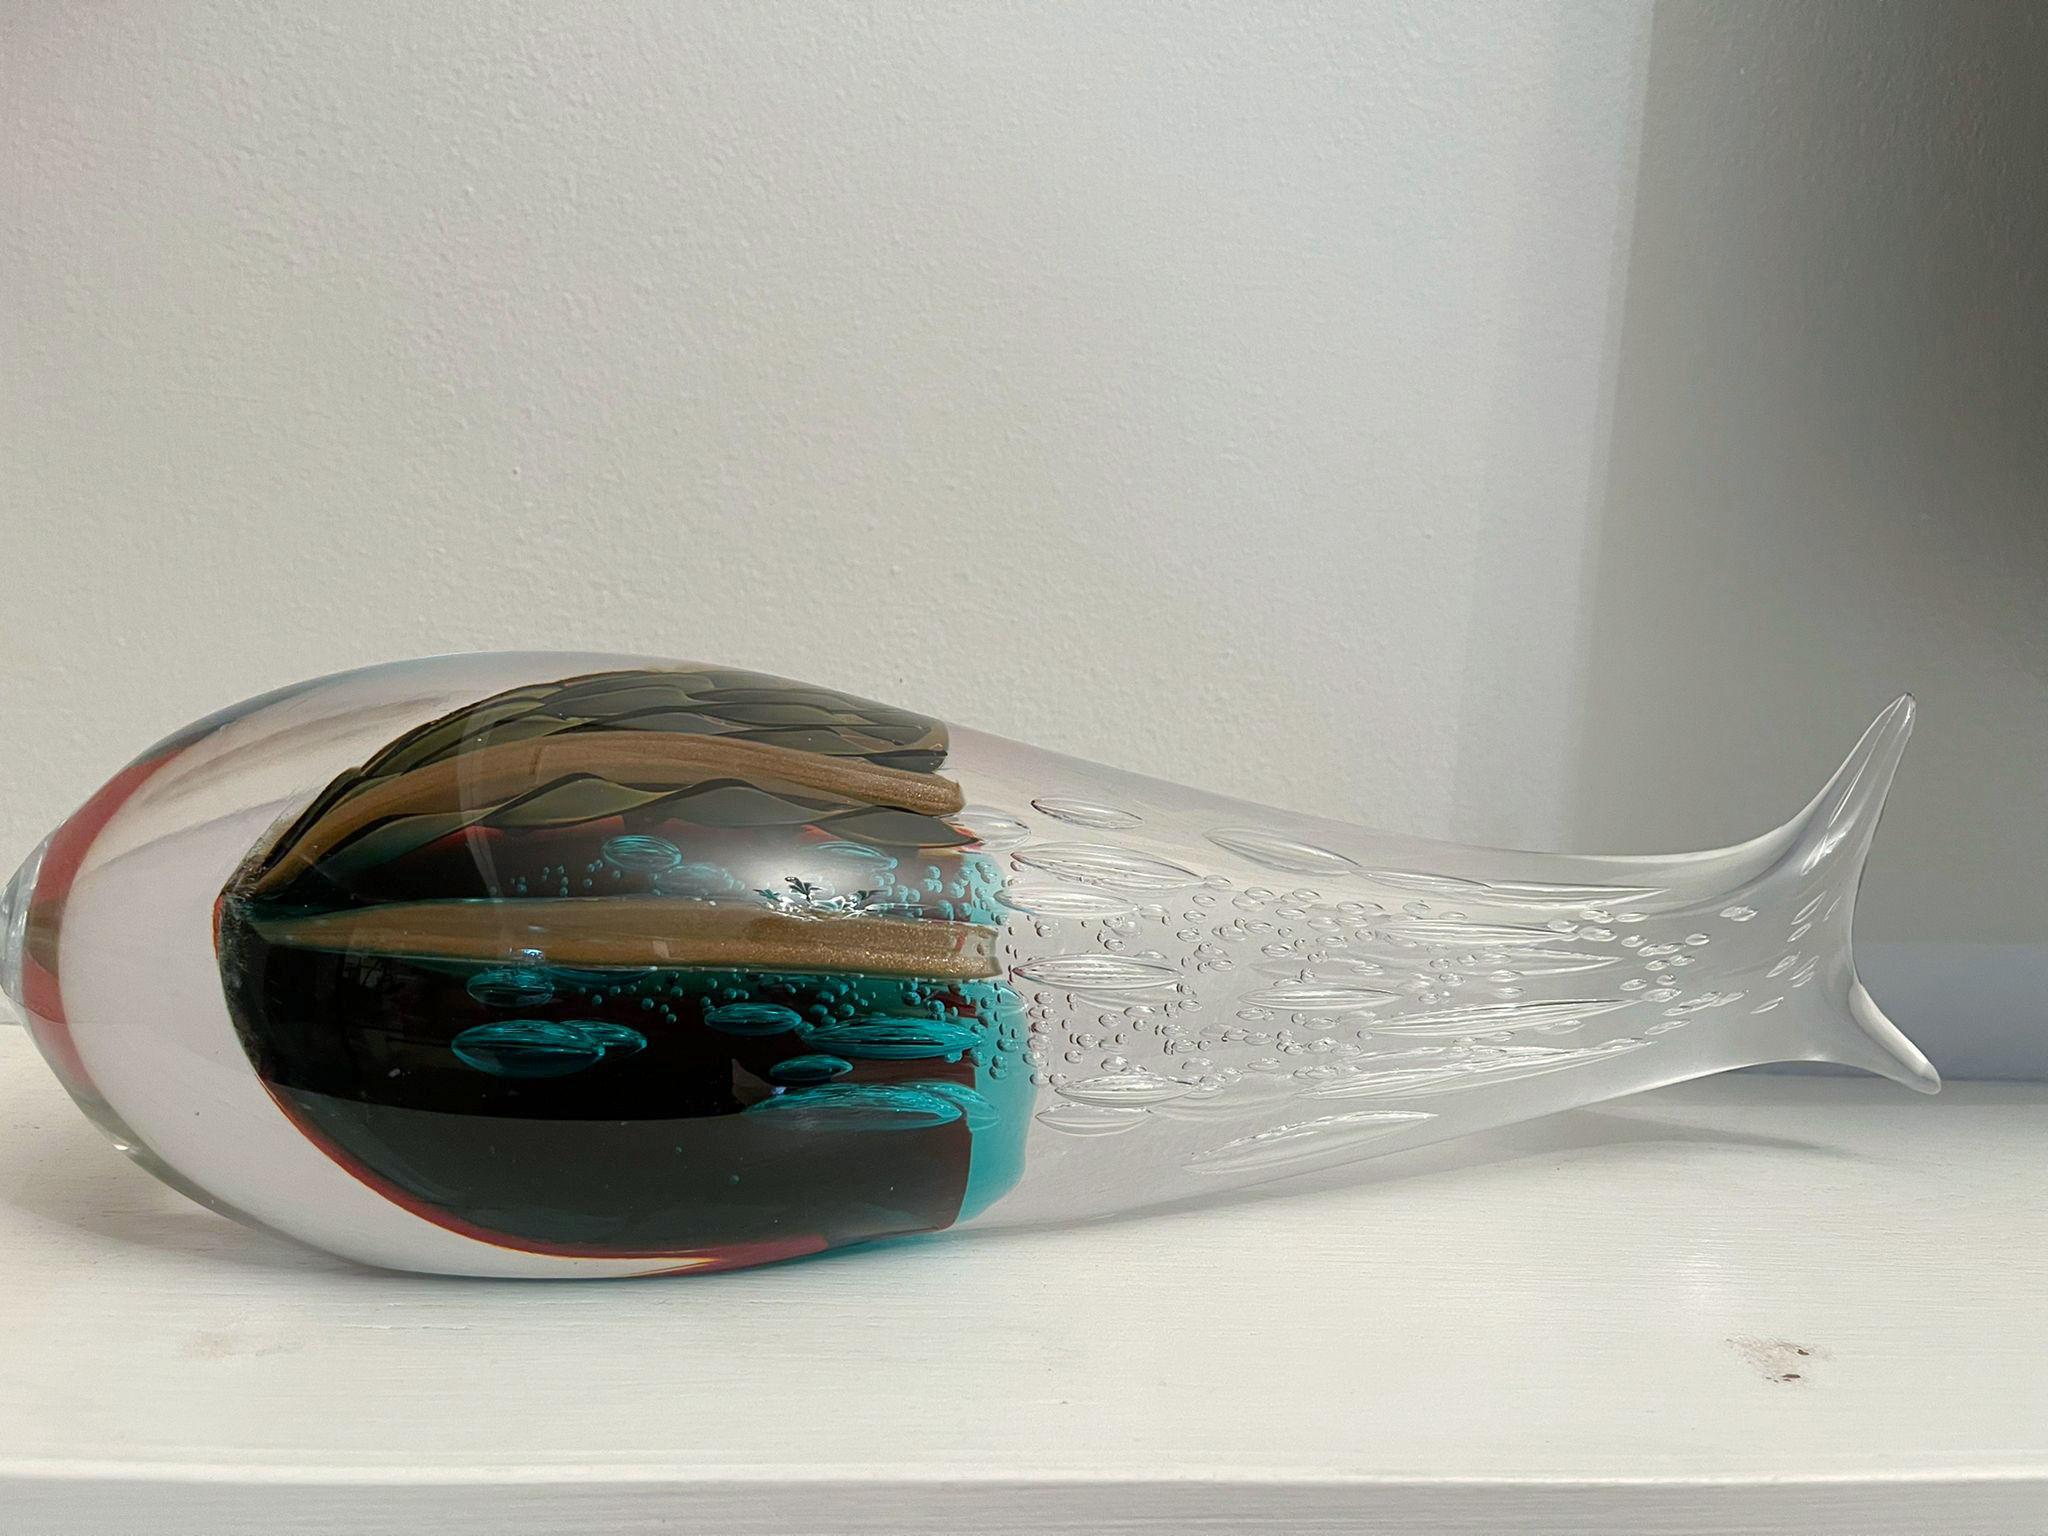 Pair of Italian abstract fish sculptures, hand blown and crafted in multiple colors of Murano glass by Sergio Constantini 
Signed “Constantini Murano” on the base / Made in Italy in the 1980’s 
Length 18 inches, width 5.5 inches, height 4.5 inches,